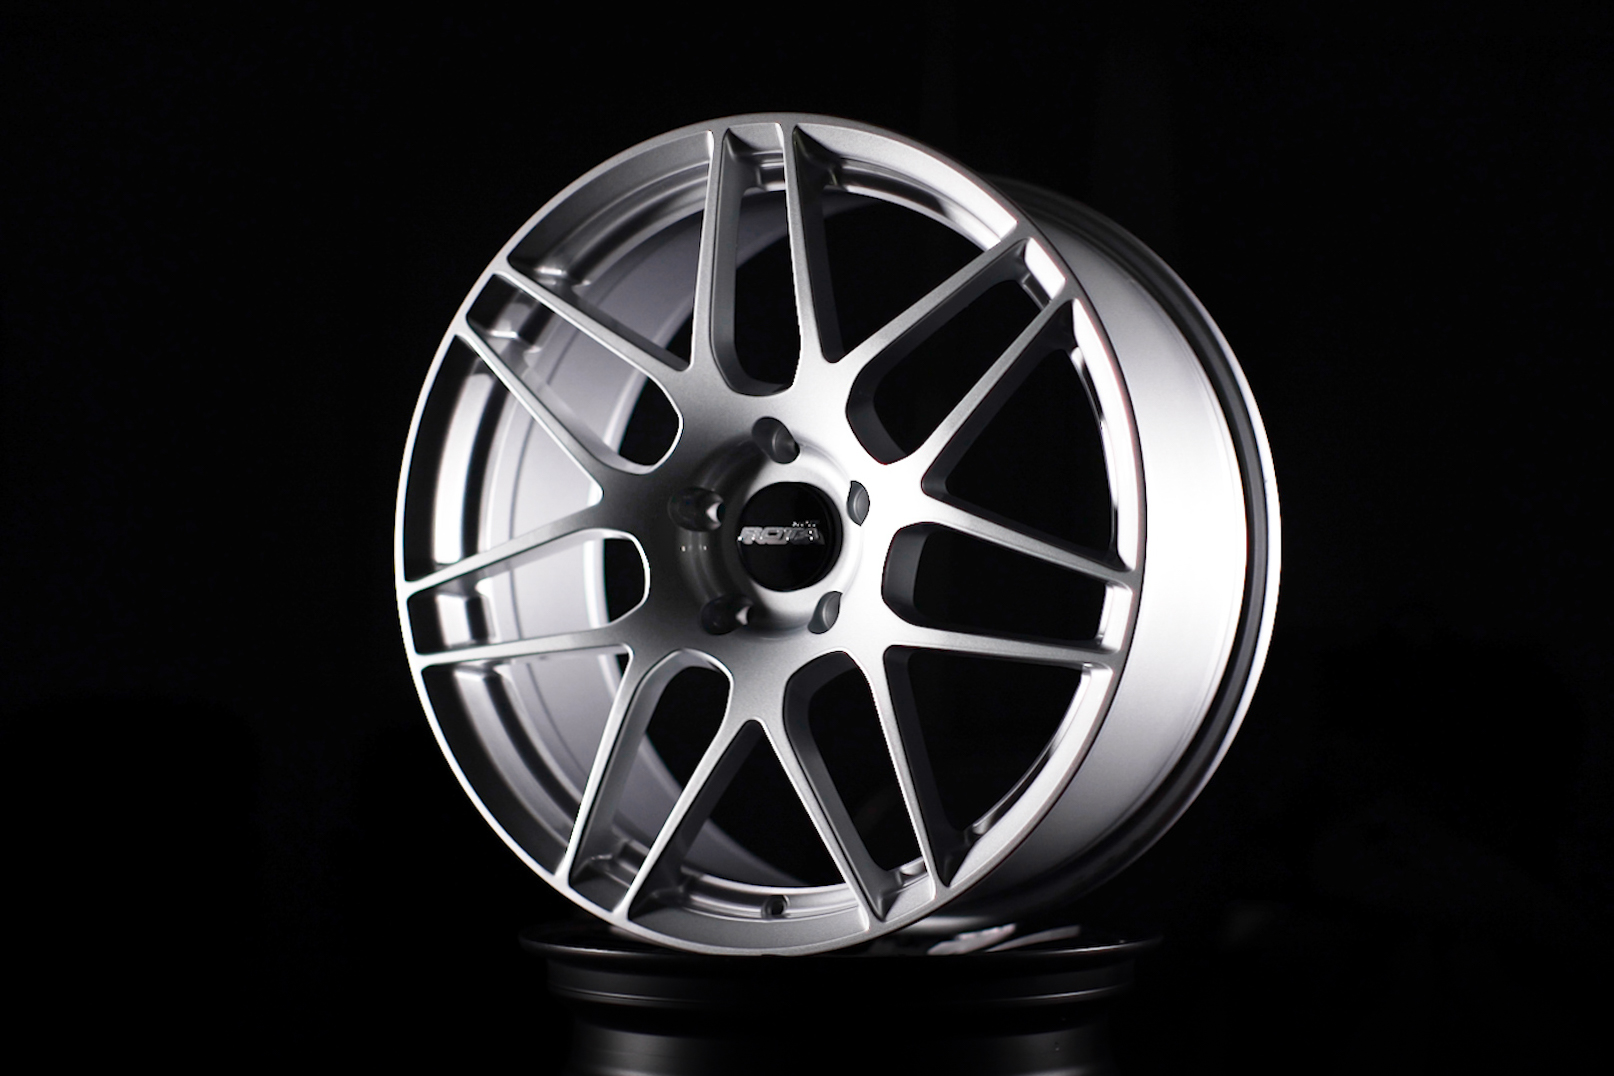 Rota (Philippine Aluminum Wheels, Inc.). Диски Forged. Литые диски Semi Forged. Литья на 20 360 Forged. 360 forged